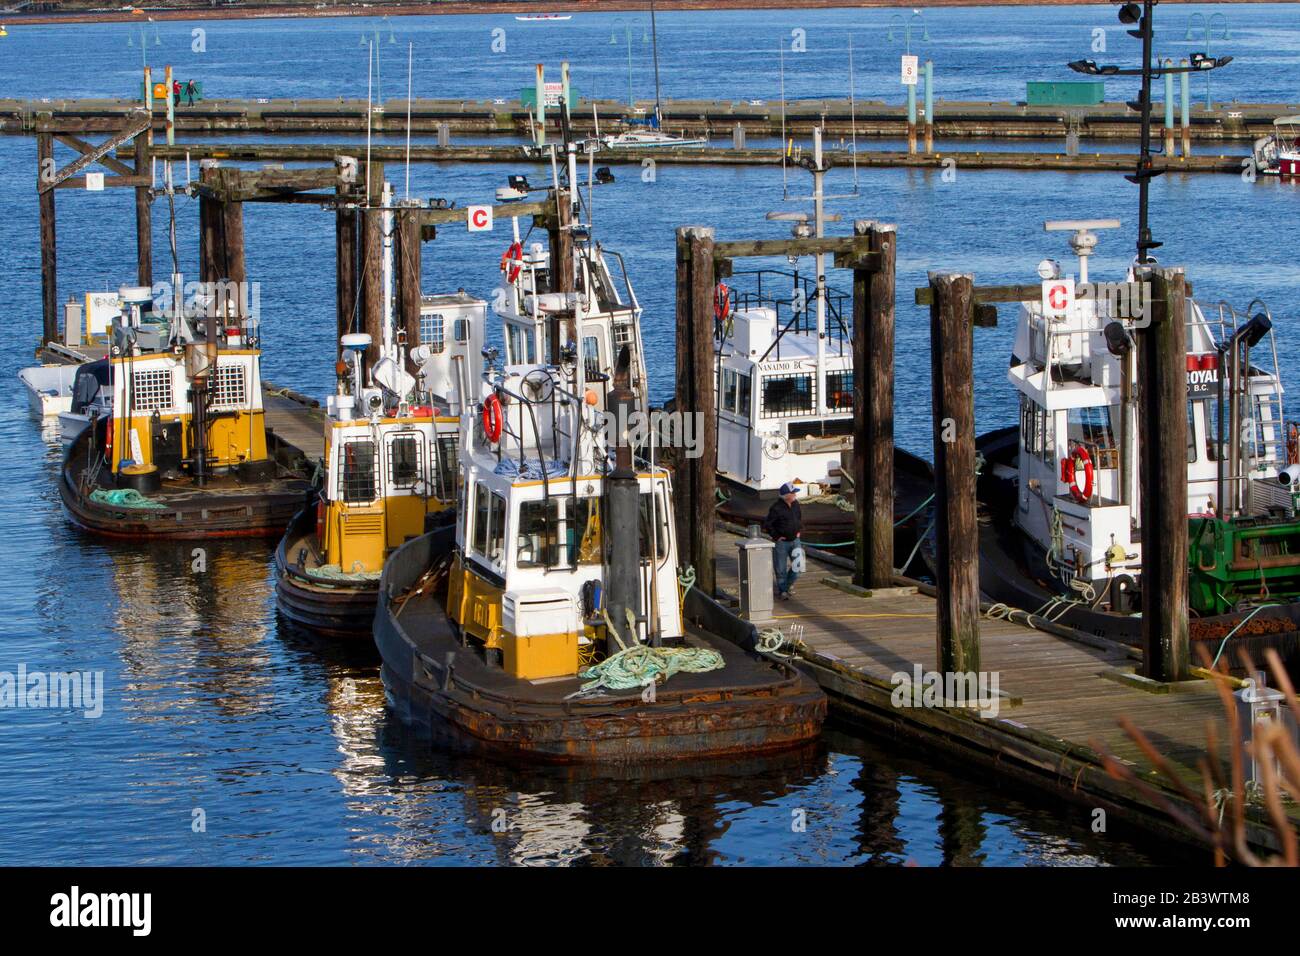 Farbenfrohe Schleppboote/Boomboote in Nanaimo Harbour, Vancouver Island, BC, Kanada Stockfoto